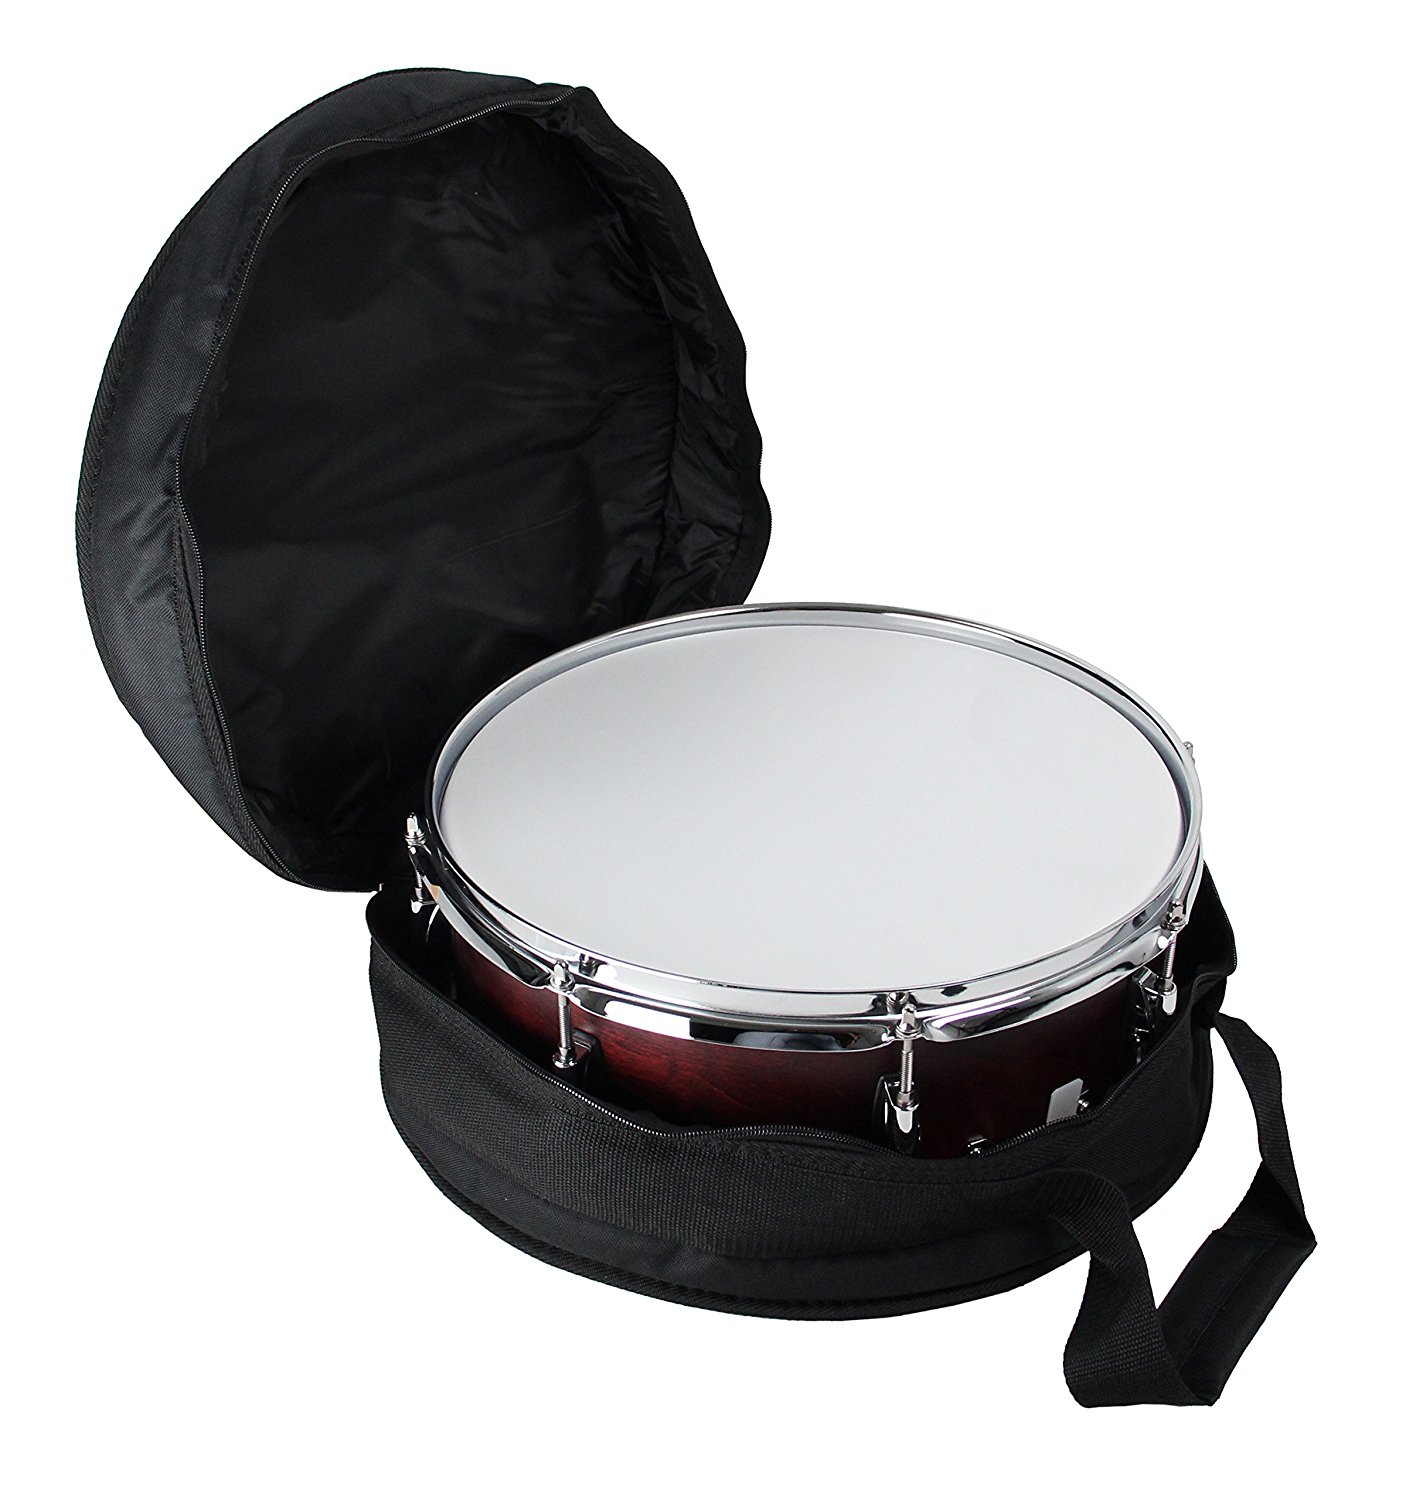 Water-resistant Snare Drum Case for 14'' Snare Drum 